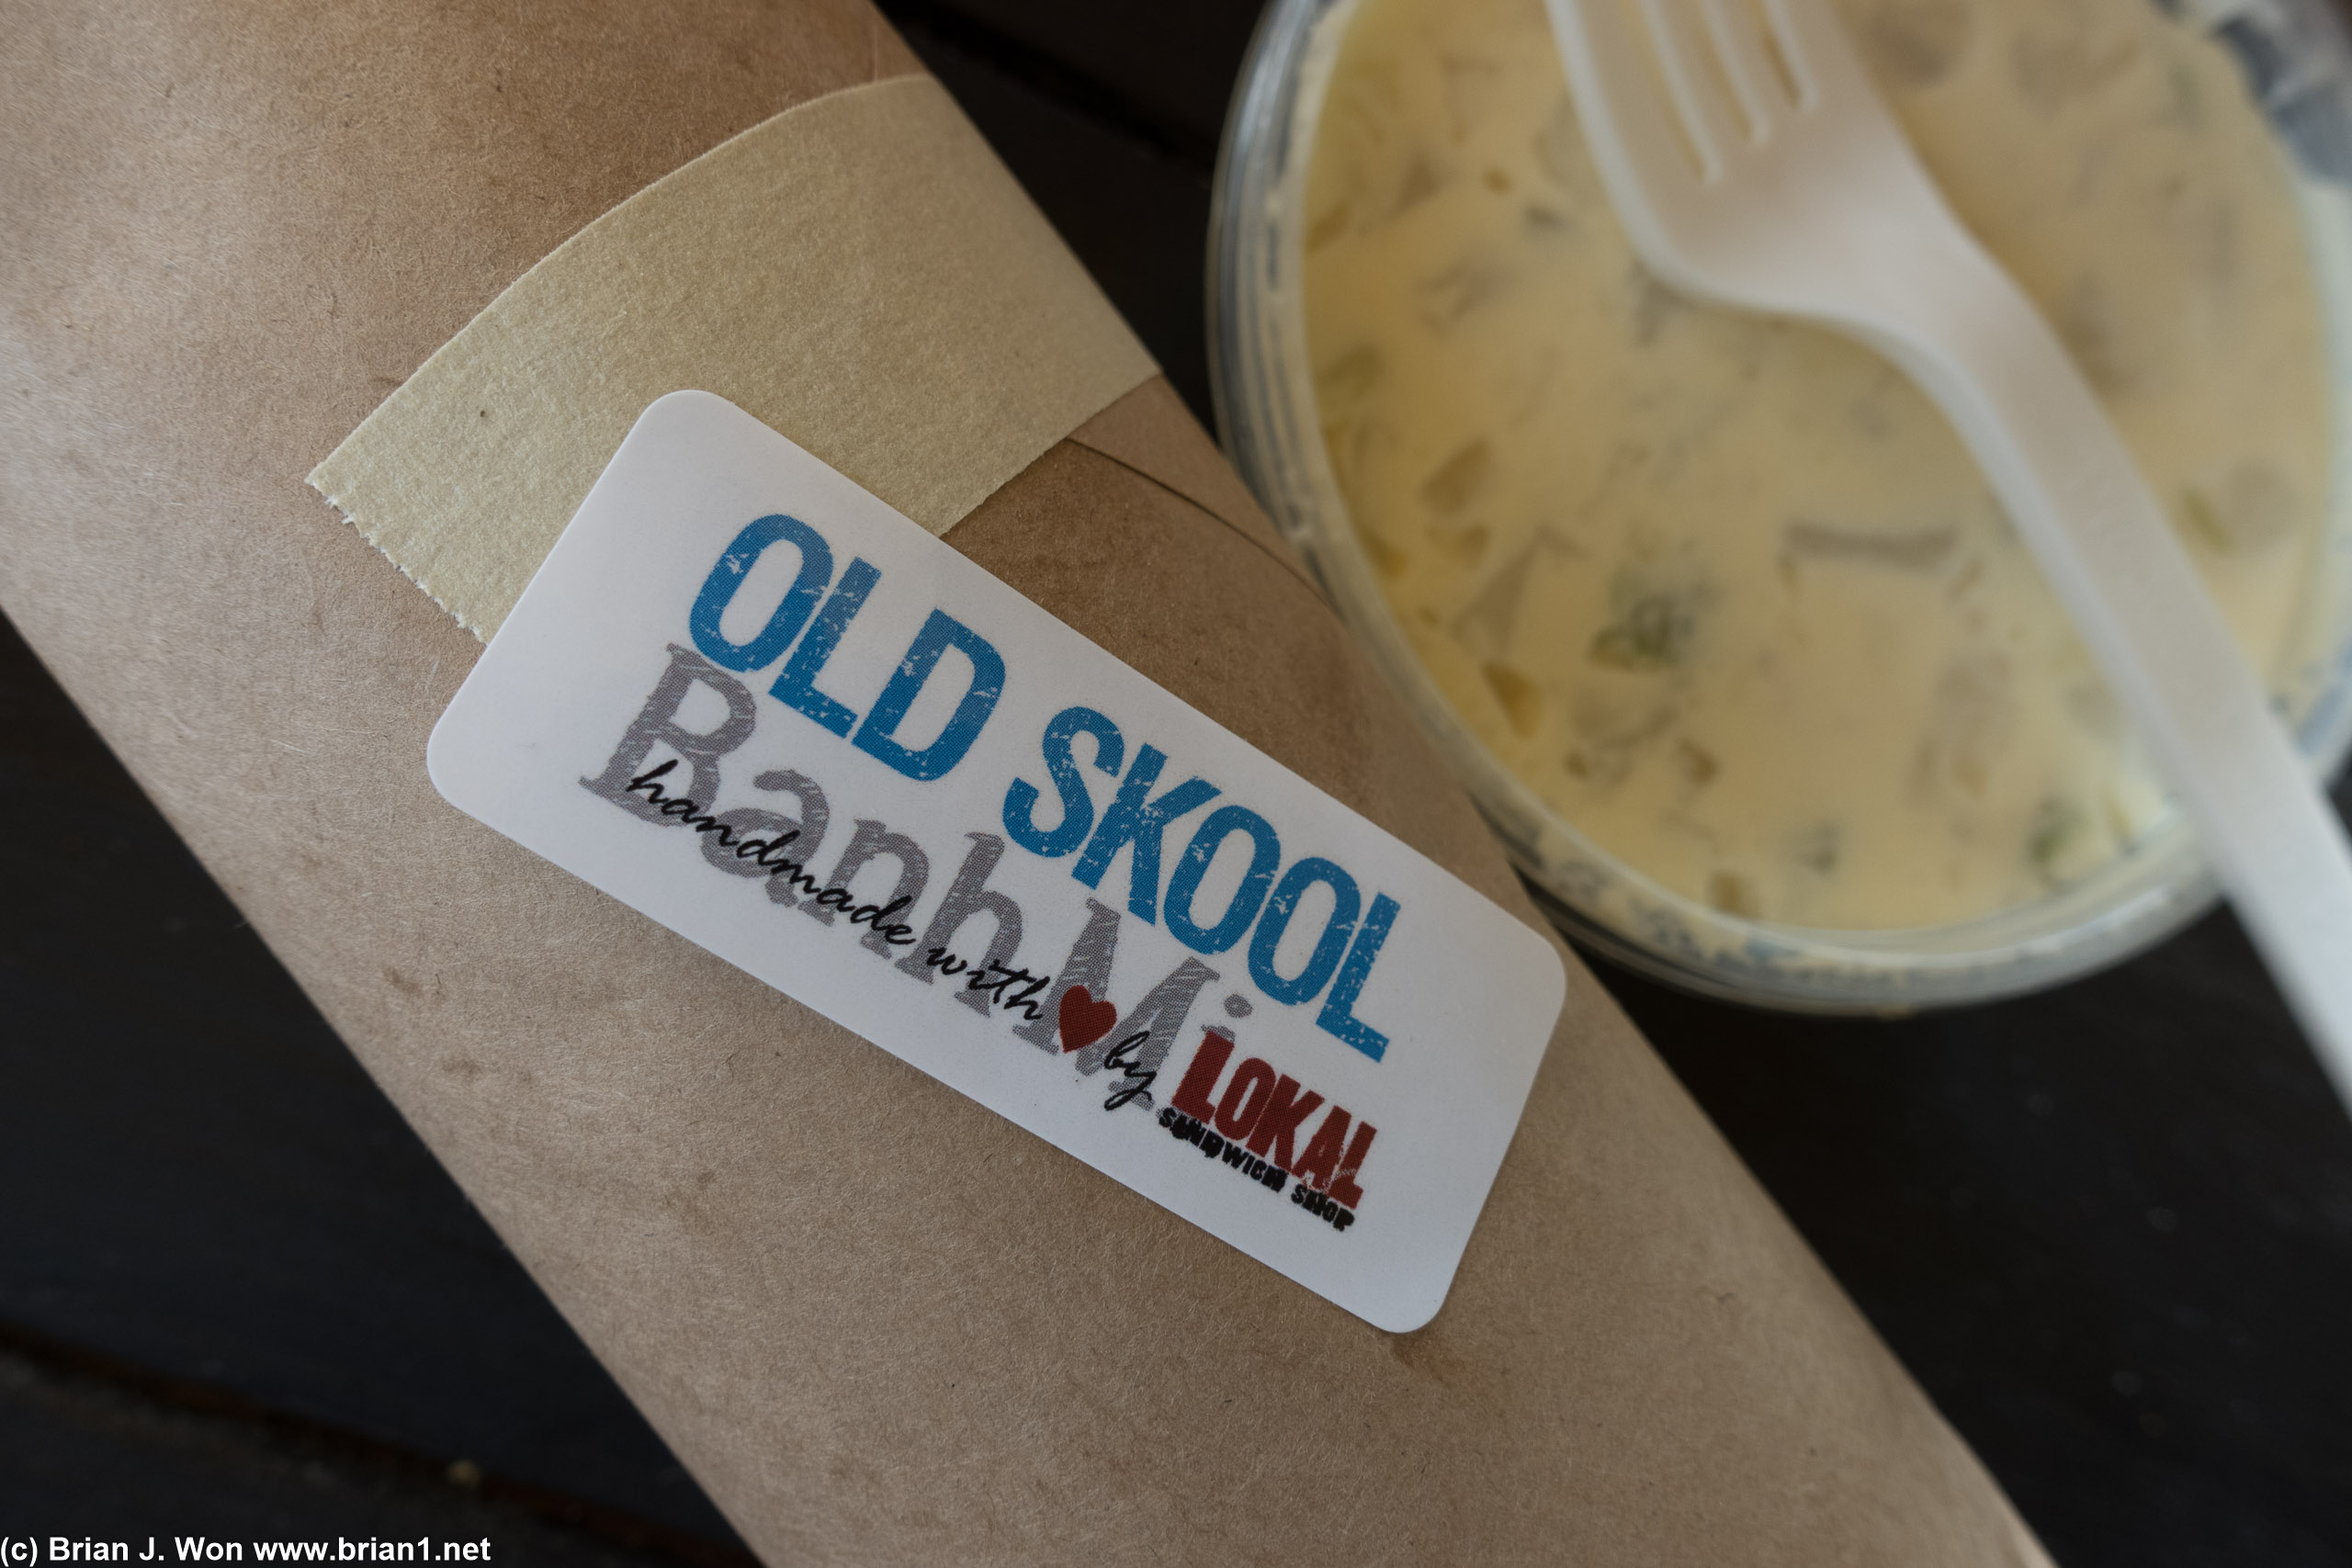 Old skool + a forgettable potato salad.